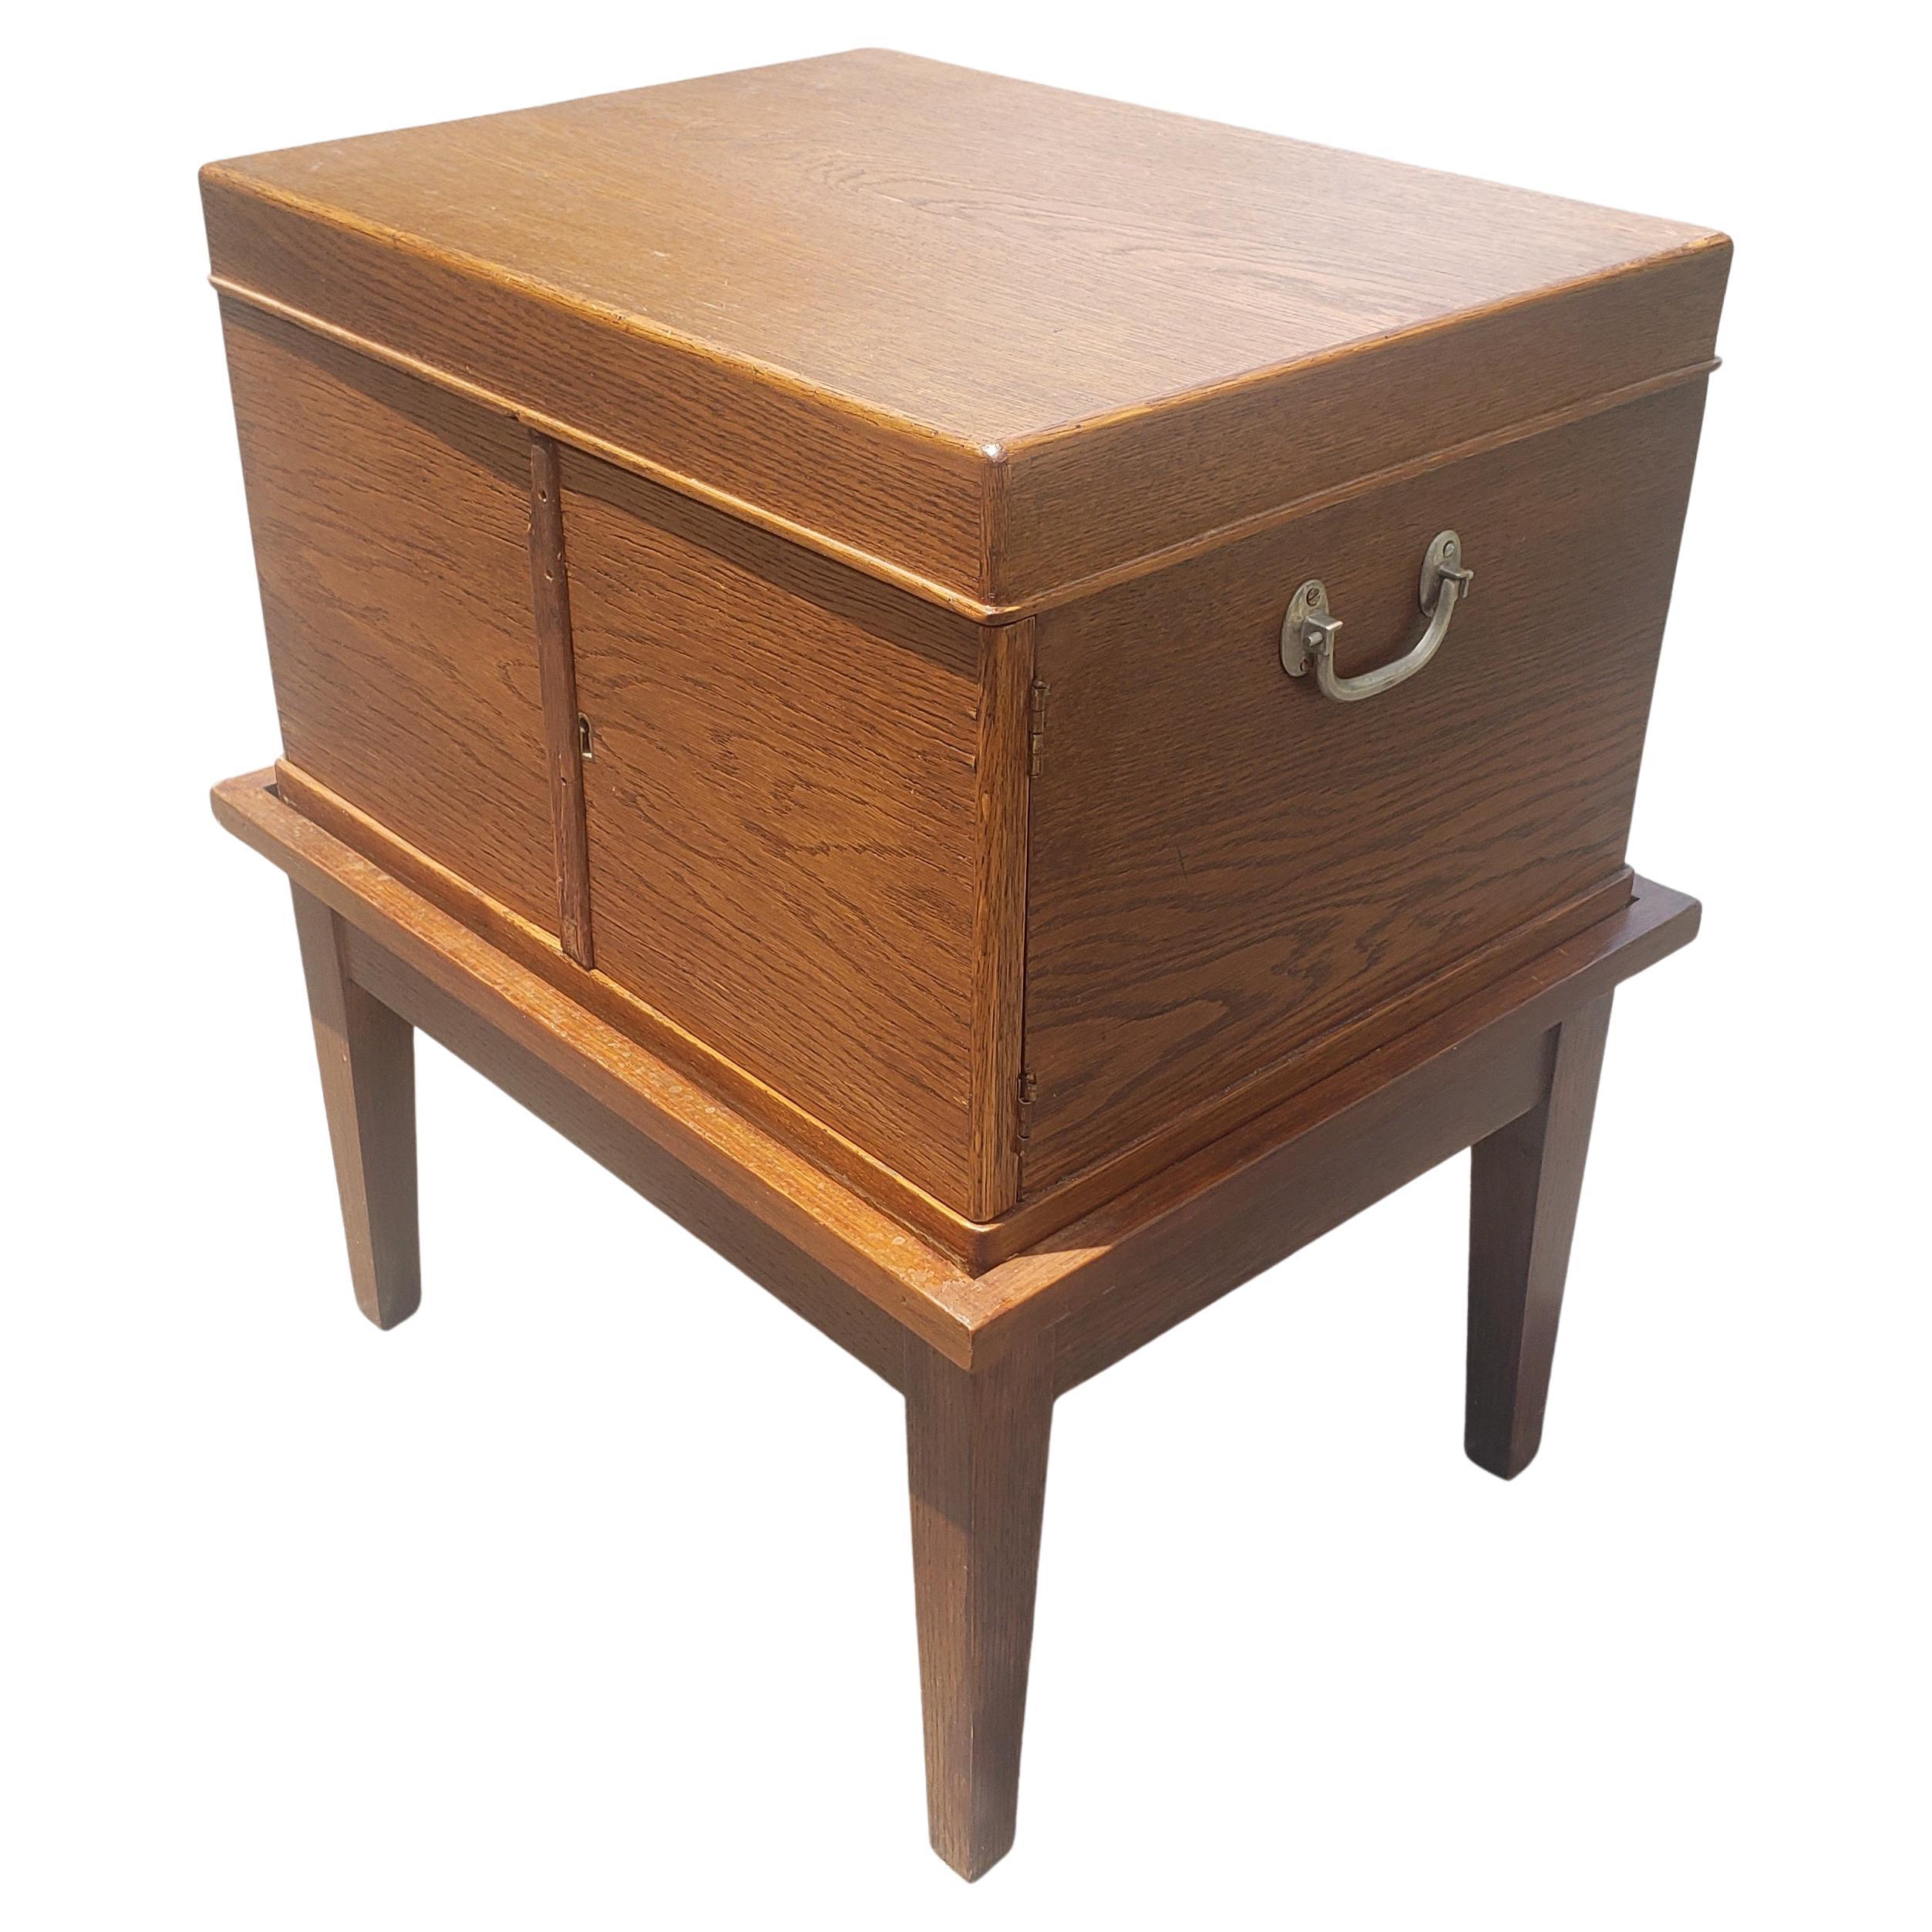 A Edwardian period Federal Style four drawer Oak Silverware Chest on stand, circa 1920s. All drawers are Anti tarnish velvet clothe lined. Some missing silver holder partitions and chip on top left door. Other in good antique antique condition.